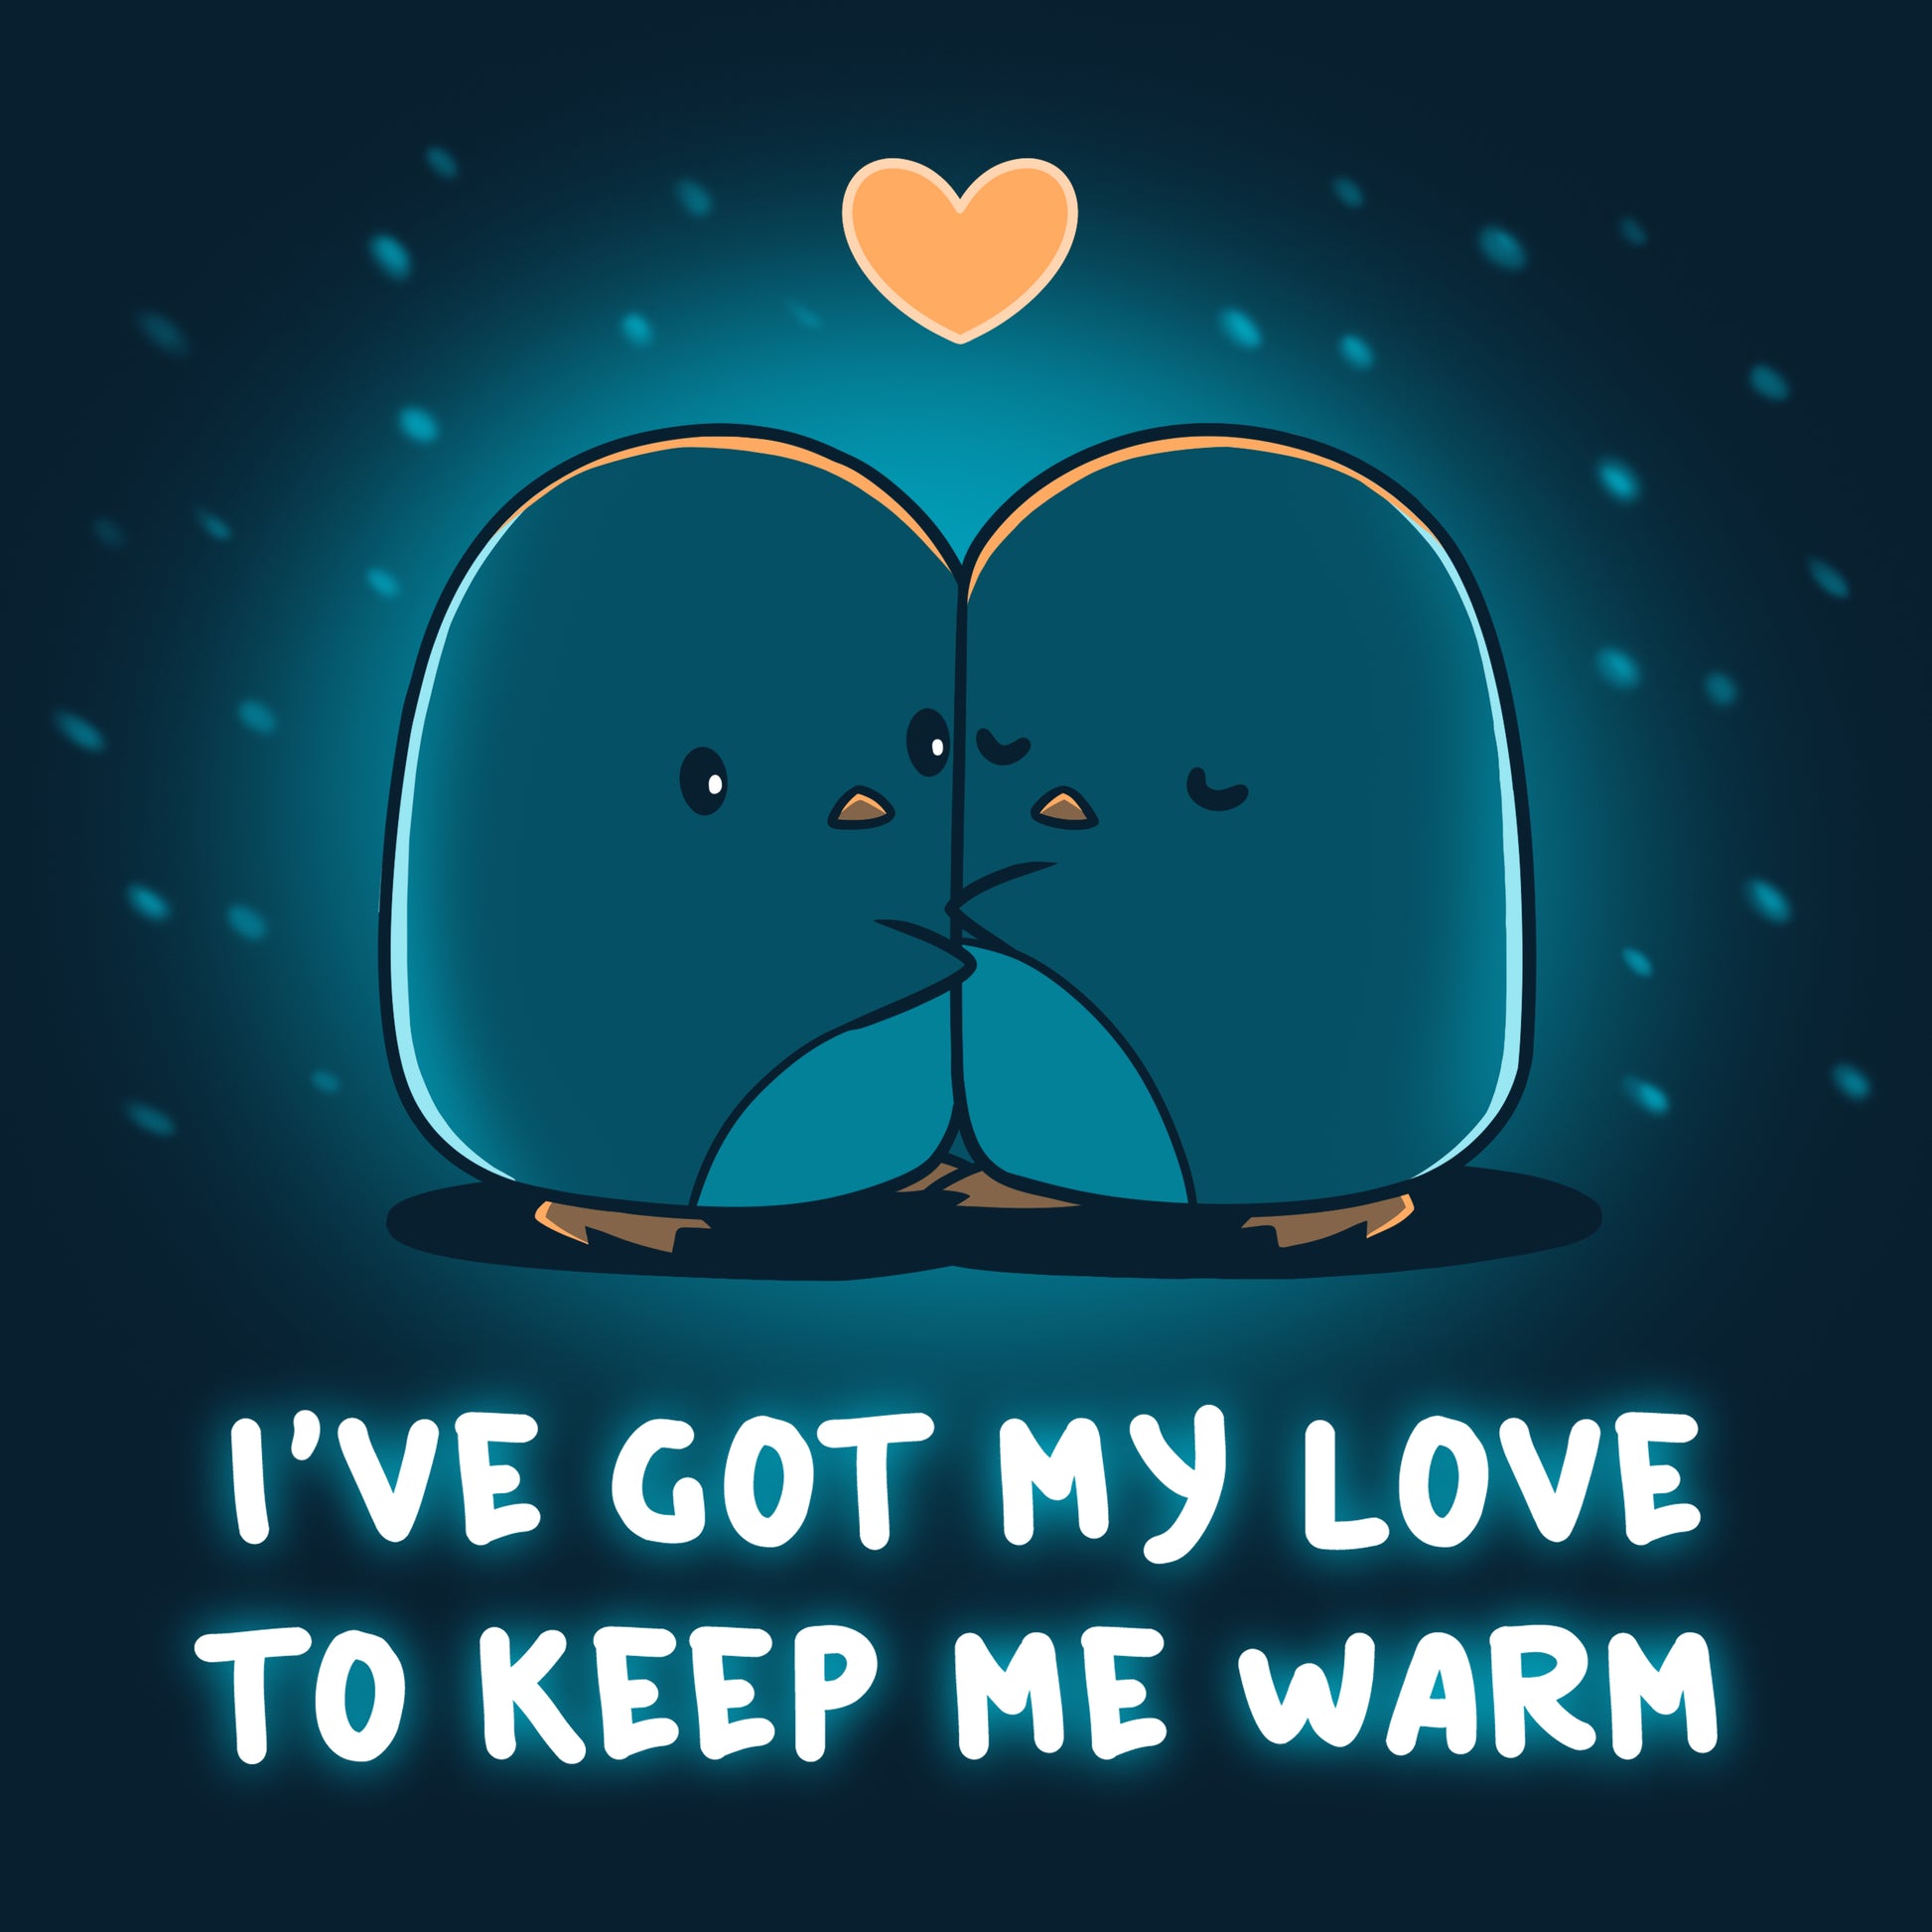 I've got my "I've Got My Love to Keep Me Warm" navy blue t-shirt from TeeTurtle to keep me warm.